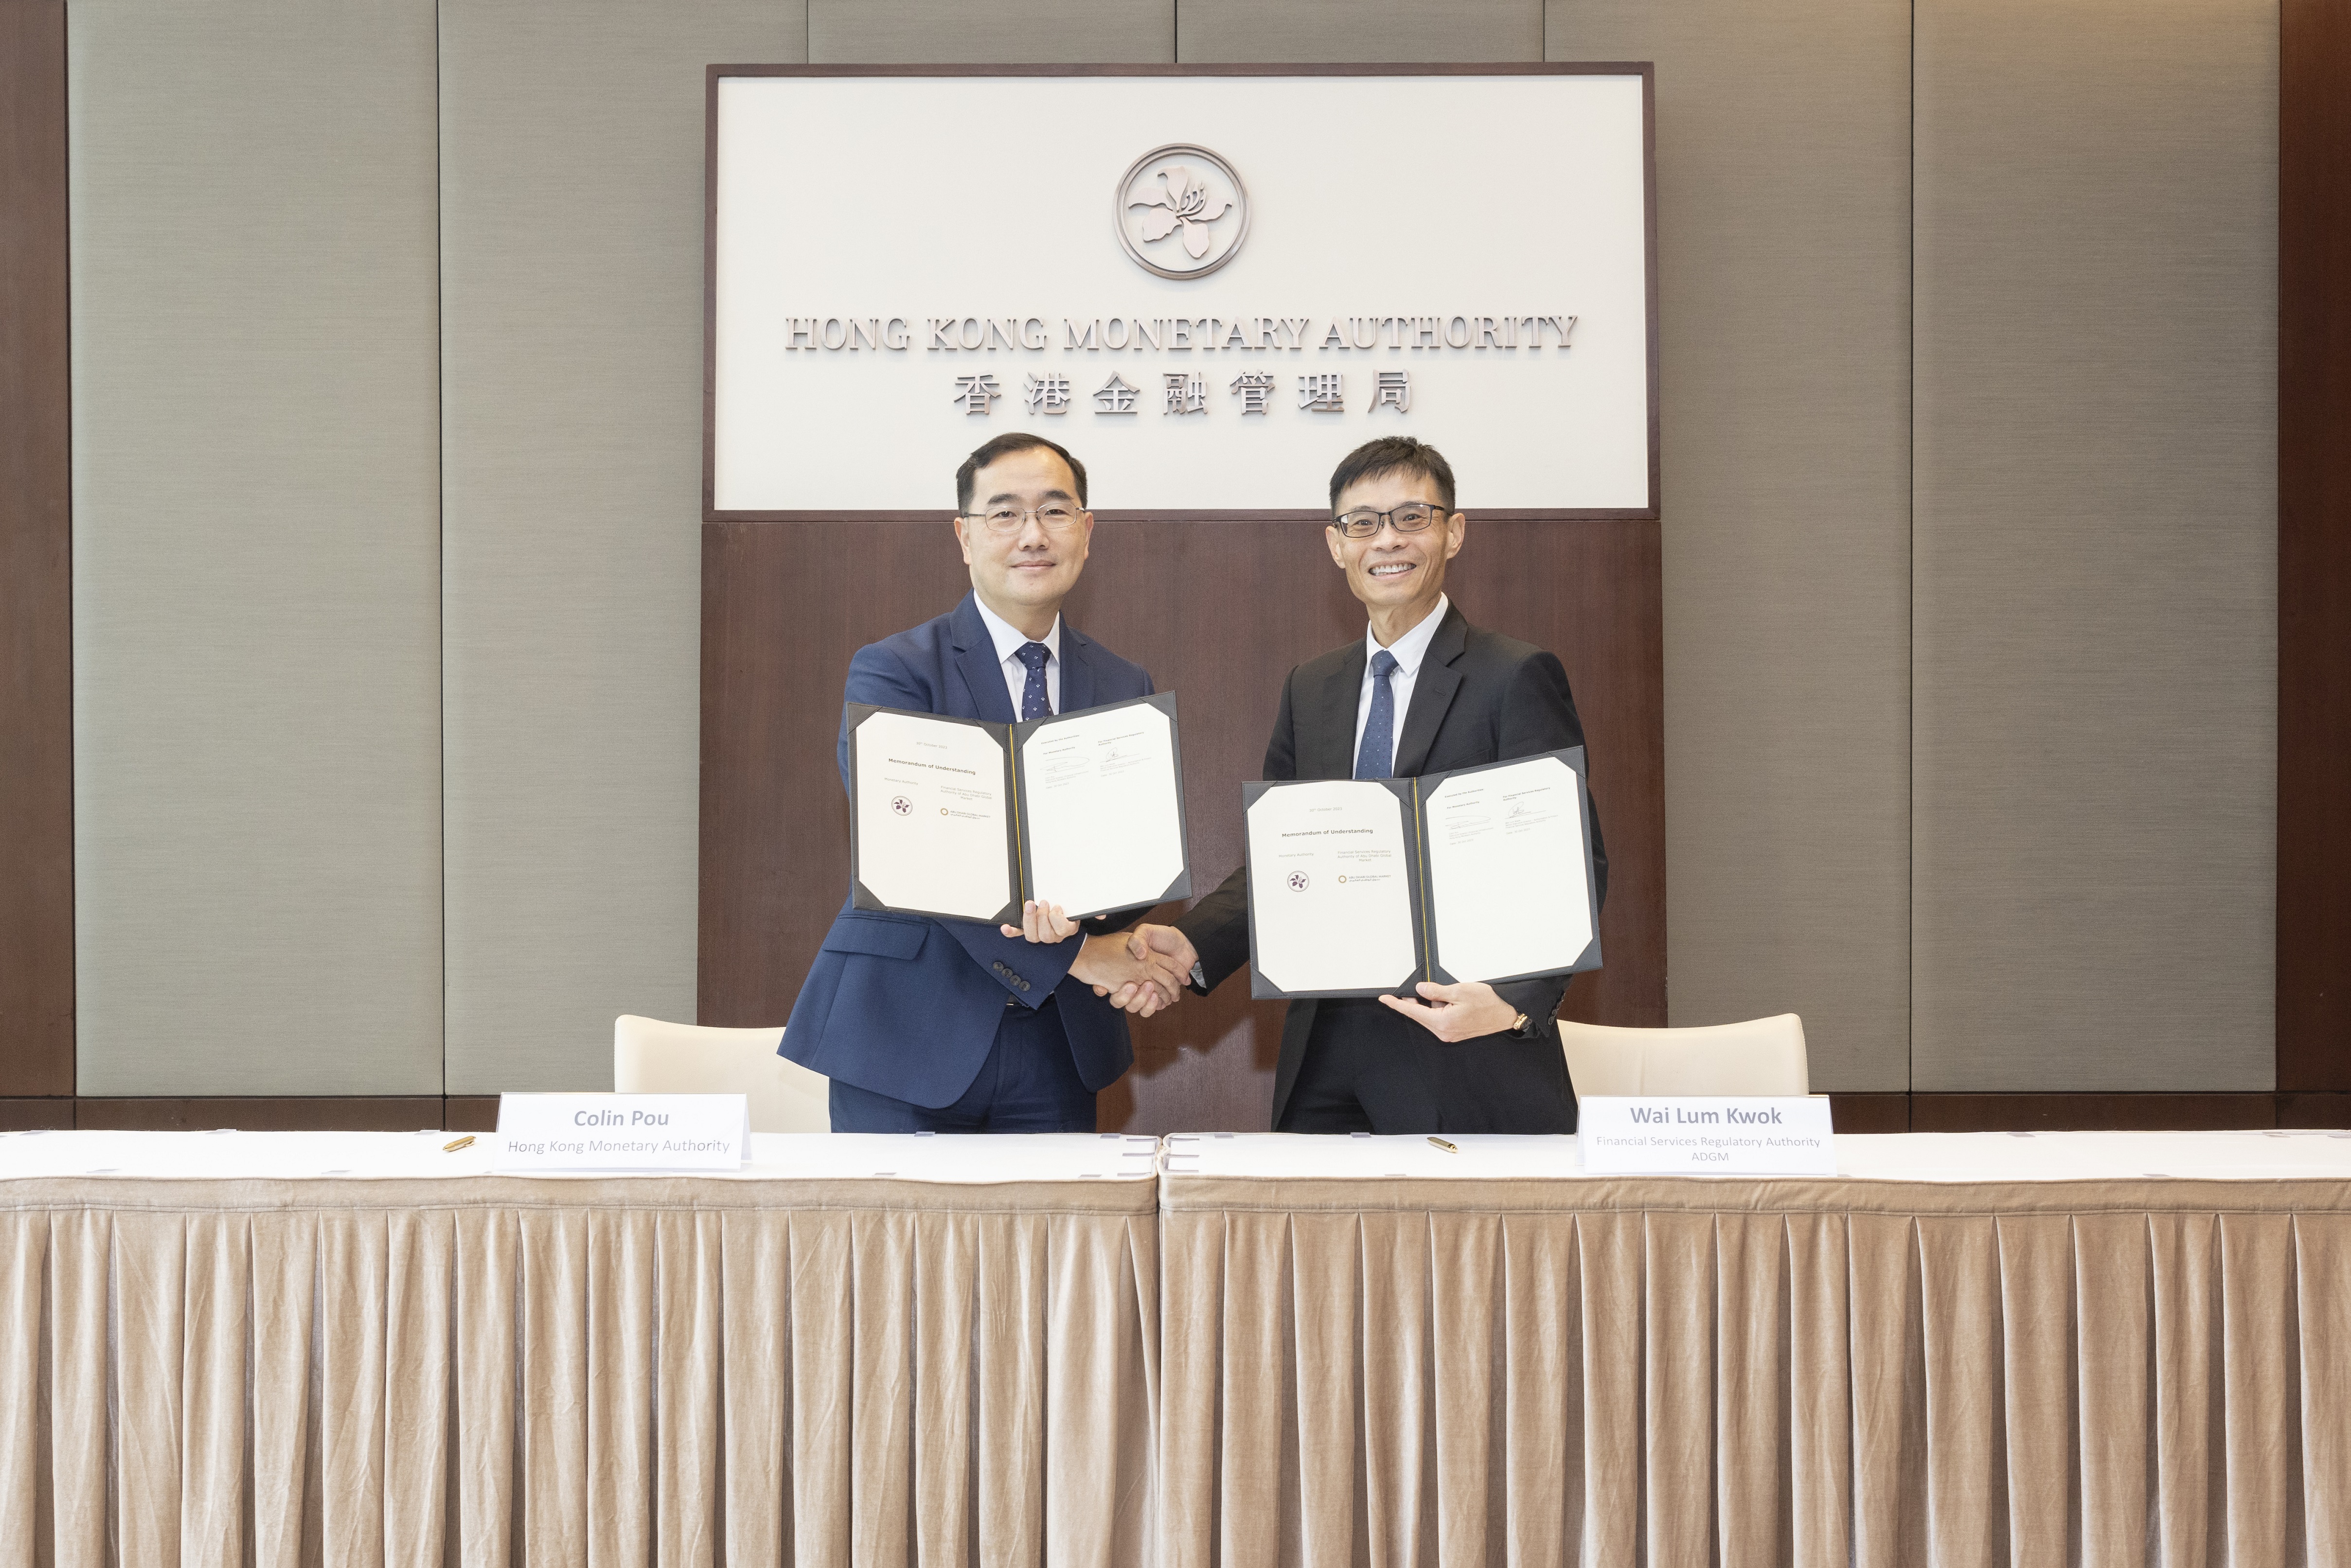 Mr Colin Pou, Executive Director (Financial Infrastructure) of the Hong Kong Monetary Authority (left), and Mr Wai Lum Kwok, Senior Executive Director - Authorisation & Fintech of the Financial Services Regulatory Authority (right), sign and exchange the Memorandum of Understanding in Hong Kong.